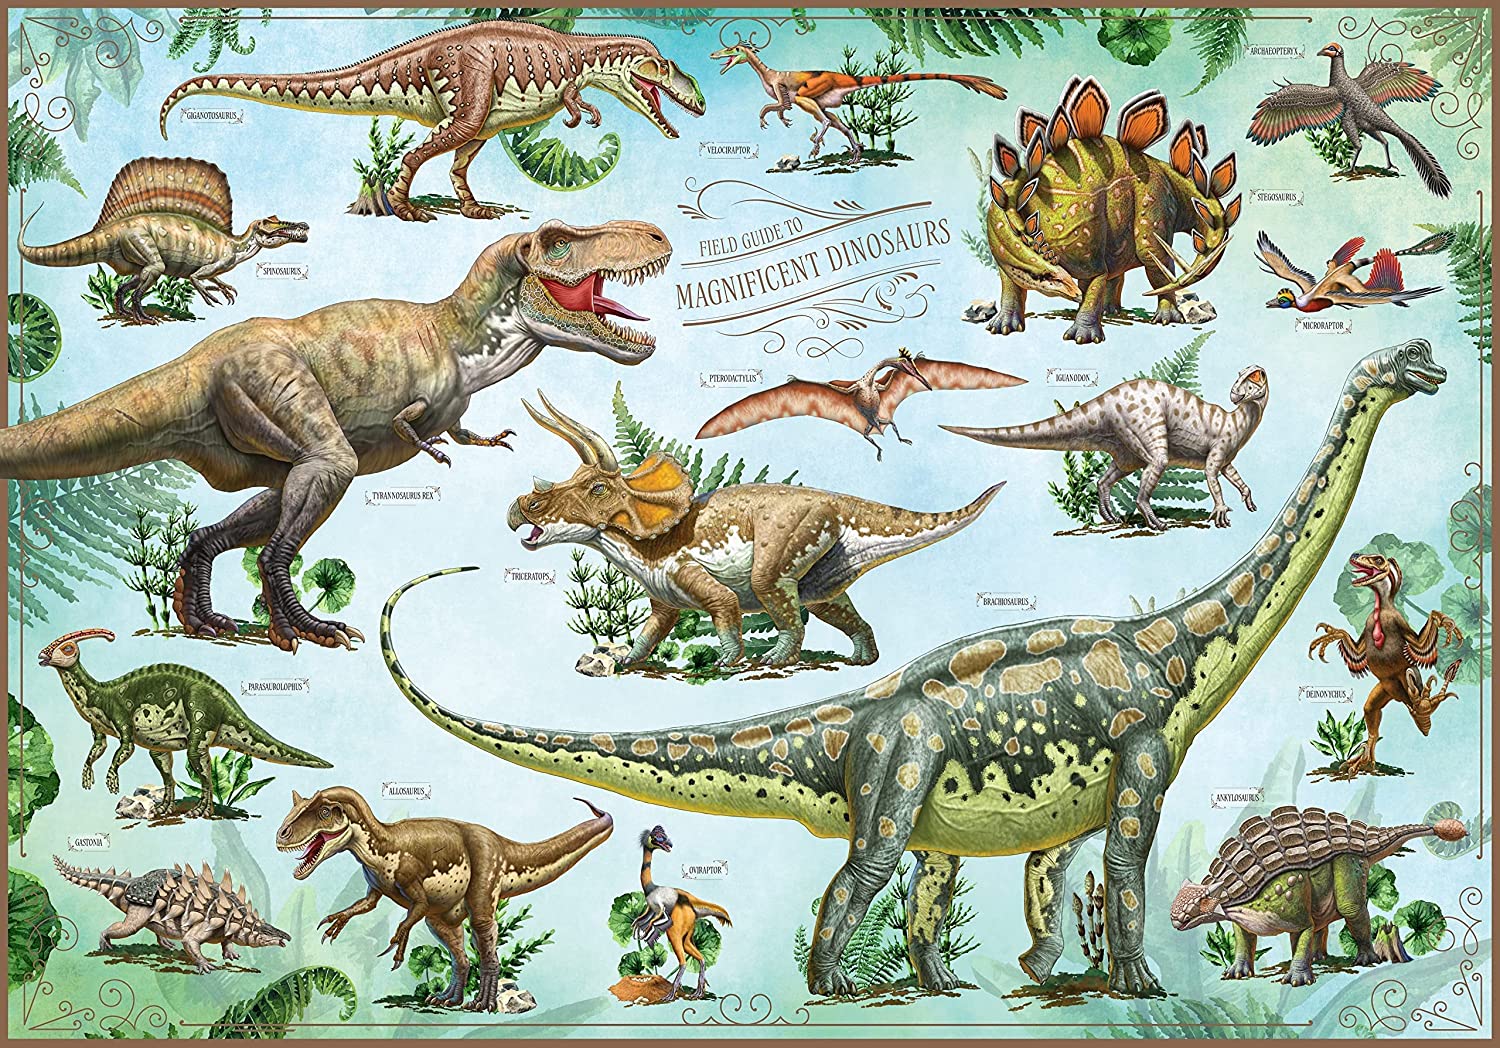 Dinosaur Jigsaw Puzzle, 500 Pieces Magnificent Dinosaurs, 20 x 14 with  Exclusive 32 Page Field Guide Book Great Gift for Kids